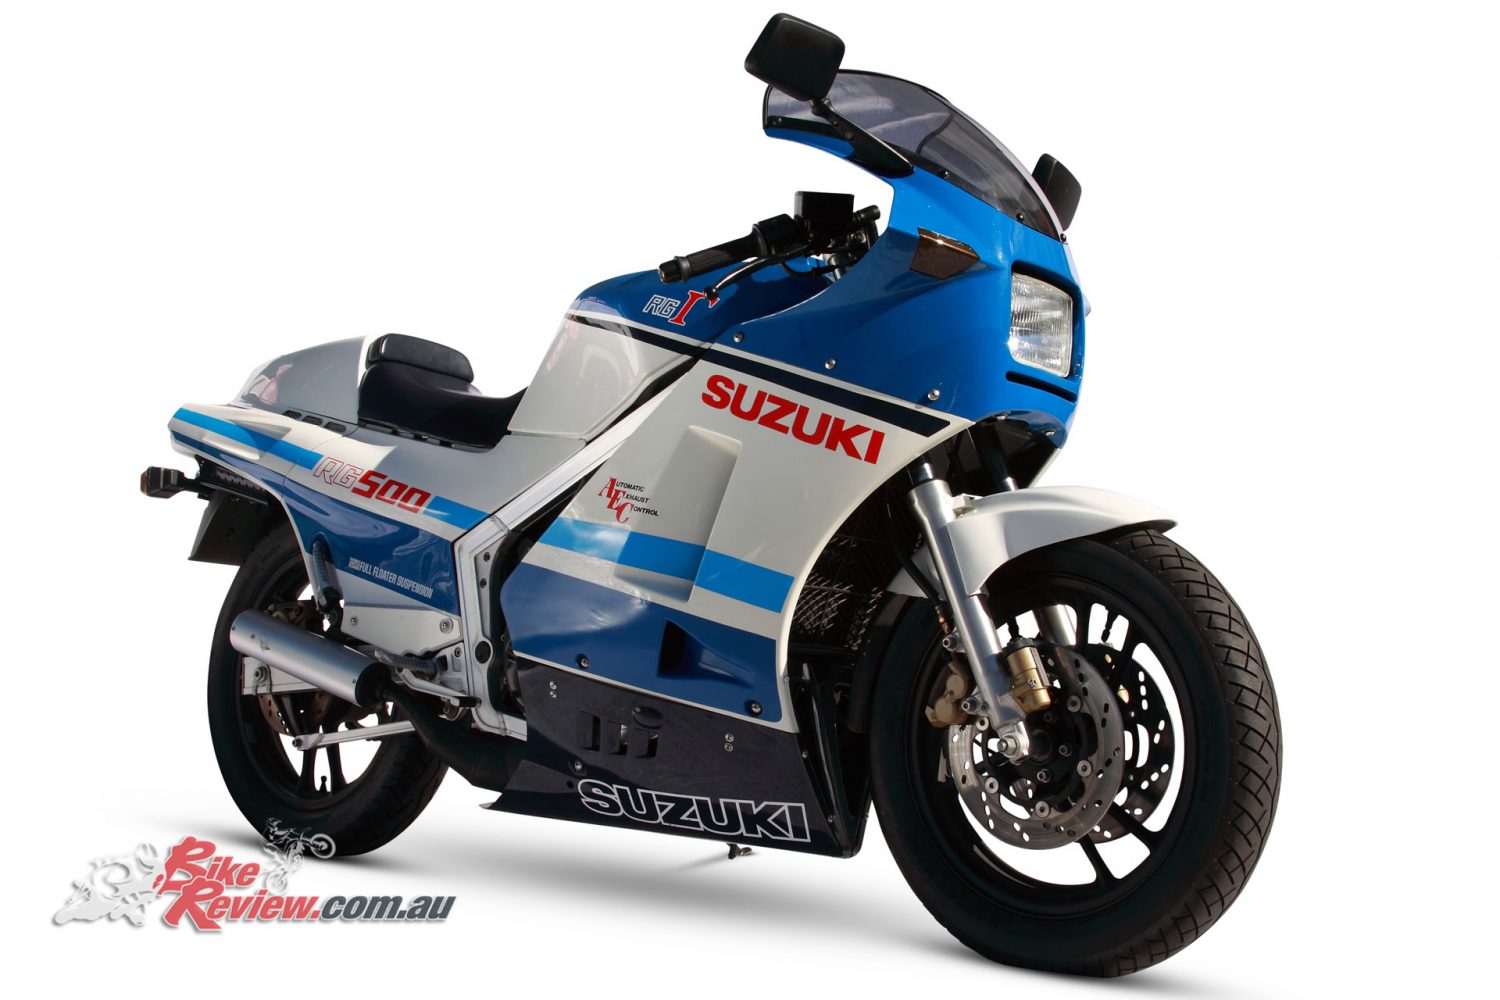 Suzuki's RG500 is one of those iconic two-strokes